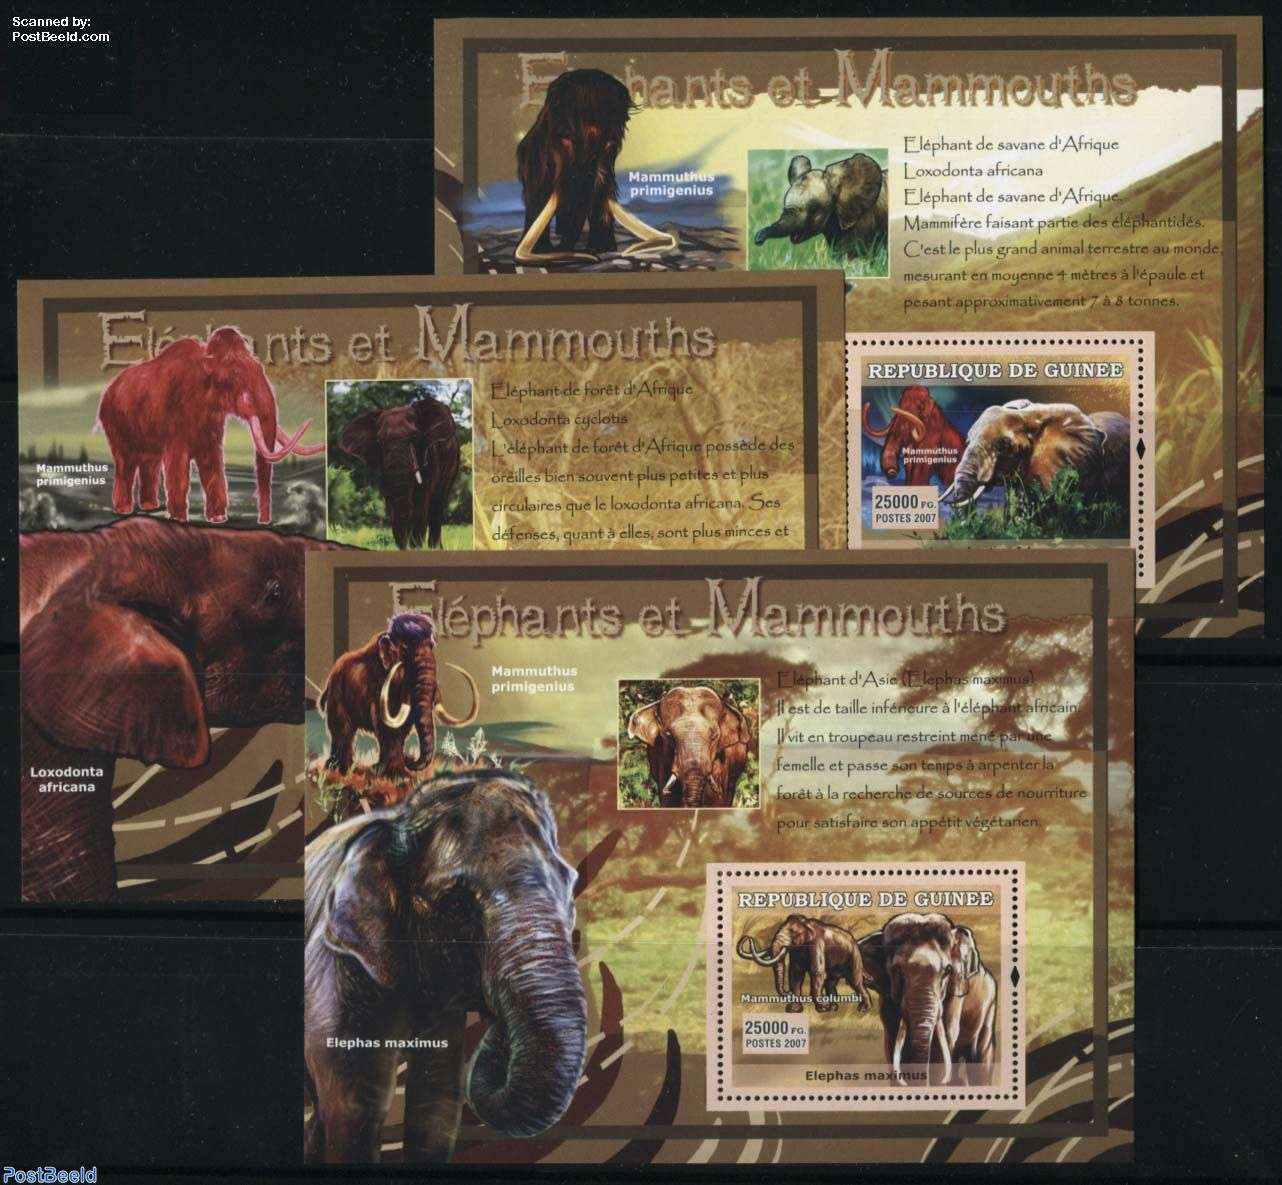 Stamp 2007, Guinea, Republic Elephants & mammoths 3 s/s, 2007 - Collecting  Stamps - PostBeeld - Online Stamp Shop - Collecting